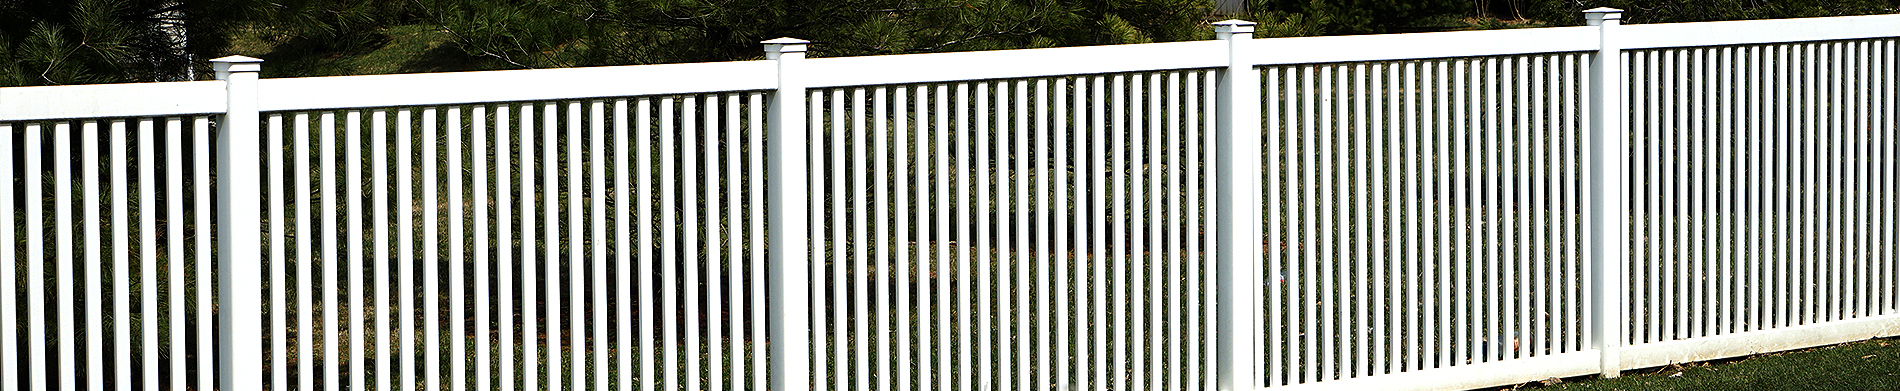 Tips to Buy Affordable Vinyl Fencing